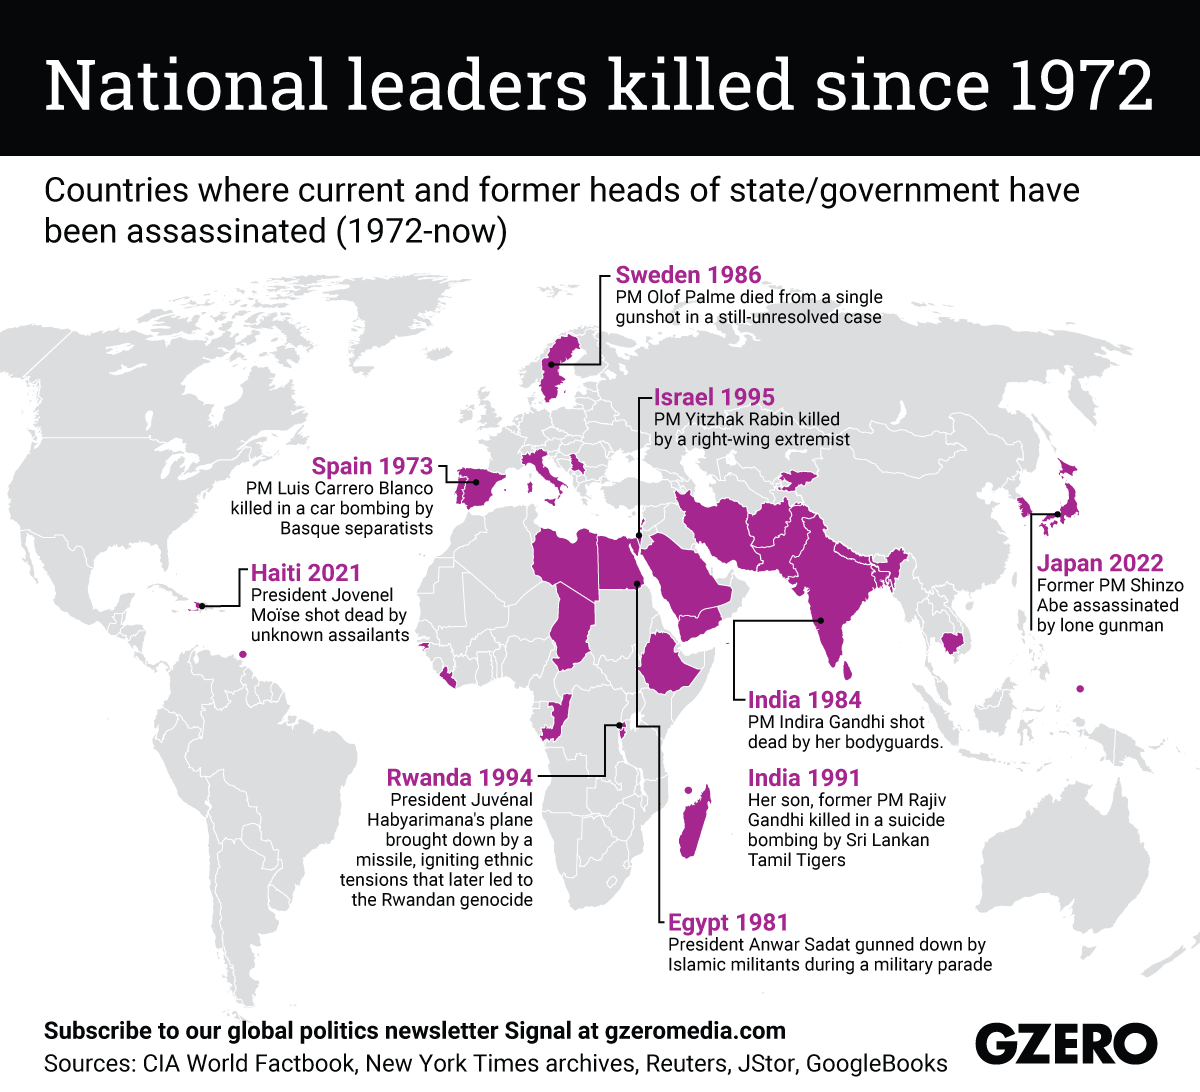 National Leaders Killed since 1972